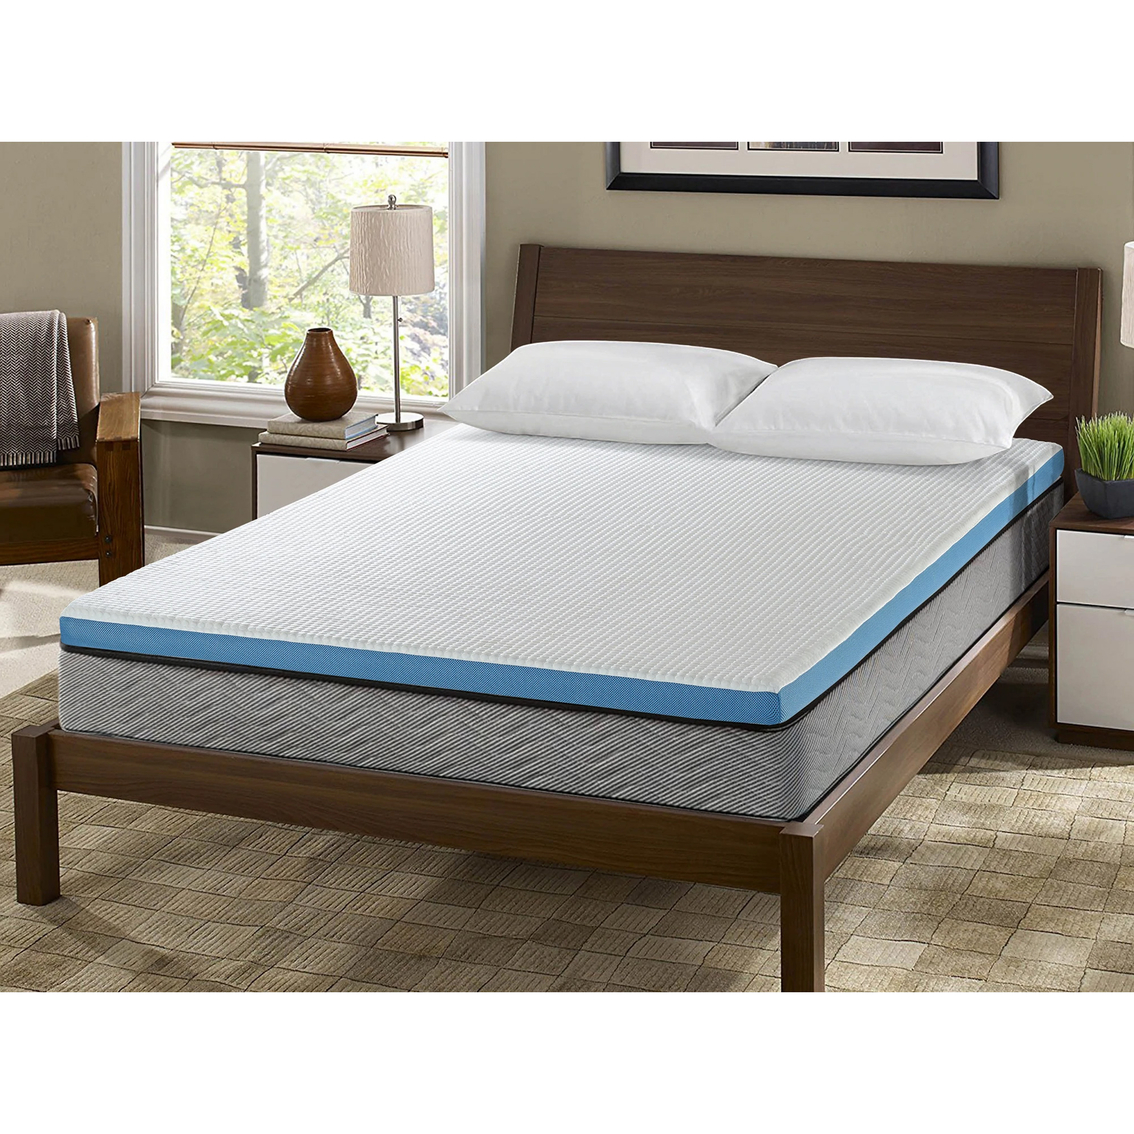 I Love Mattress Out Cold Copper Mattress Topper - Image 2 of 4